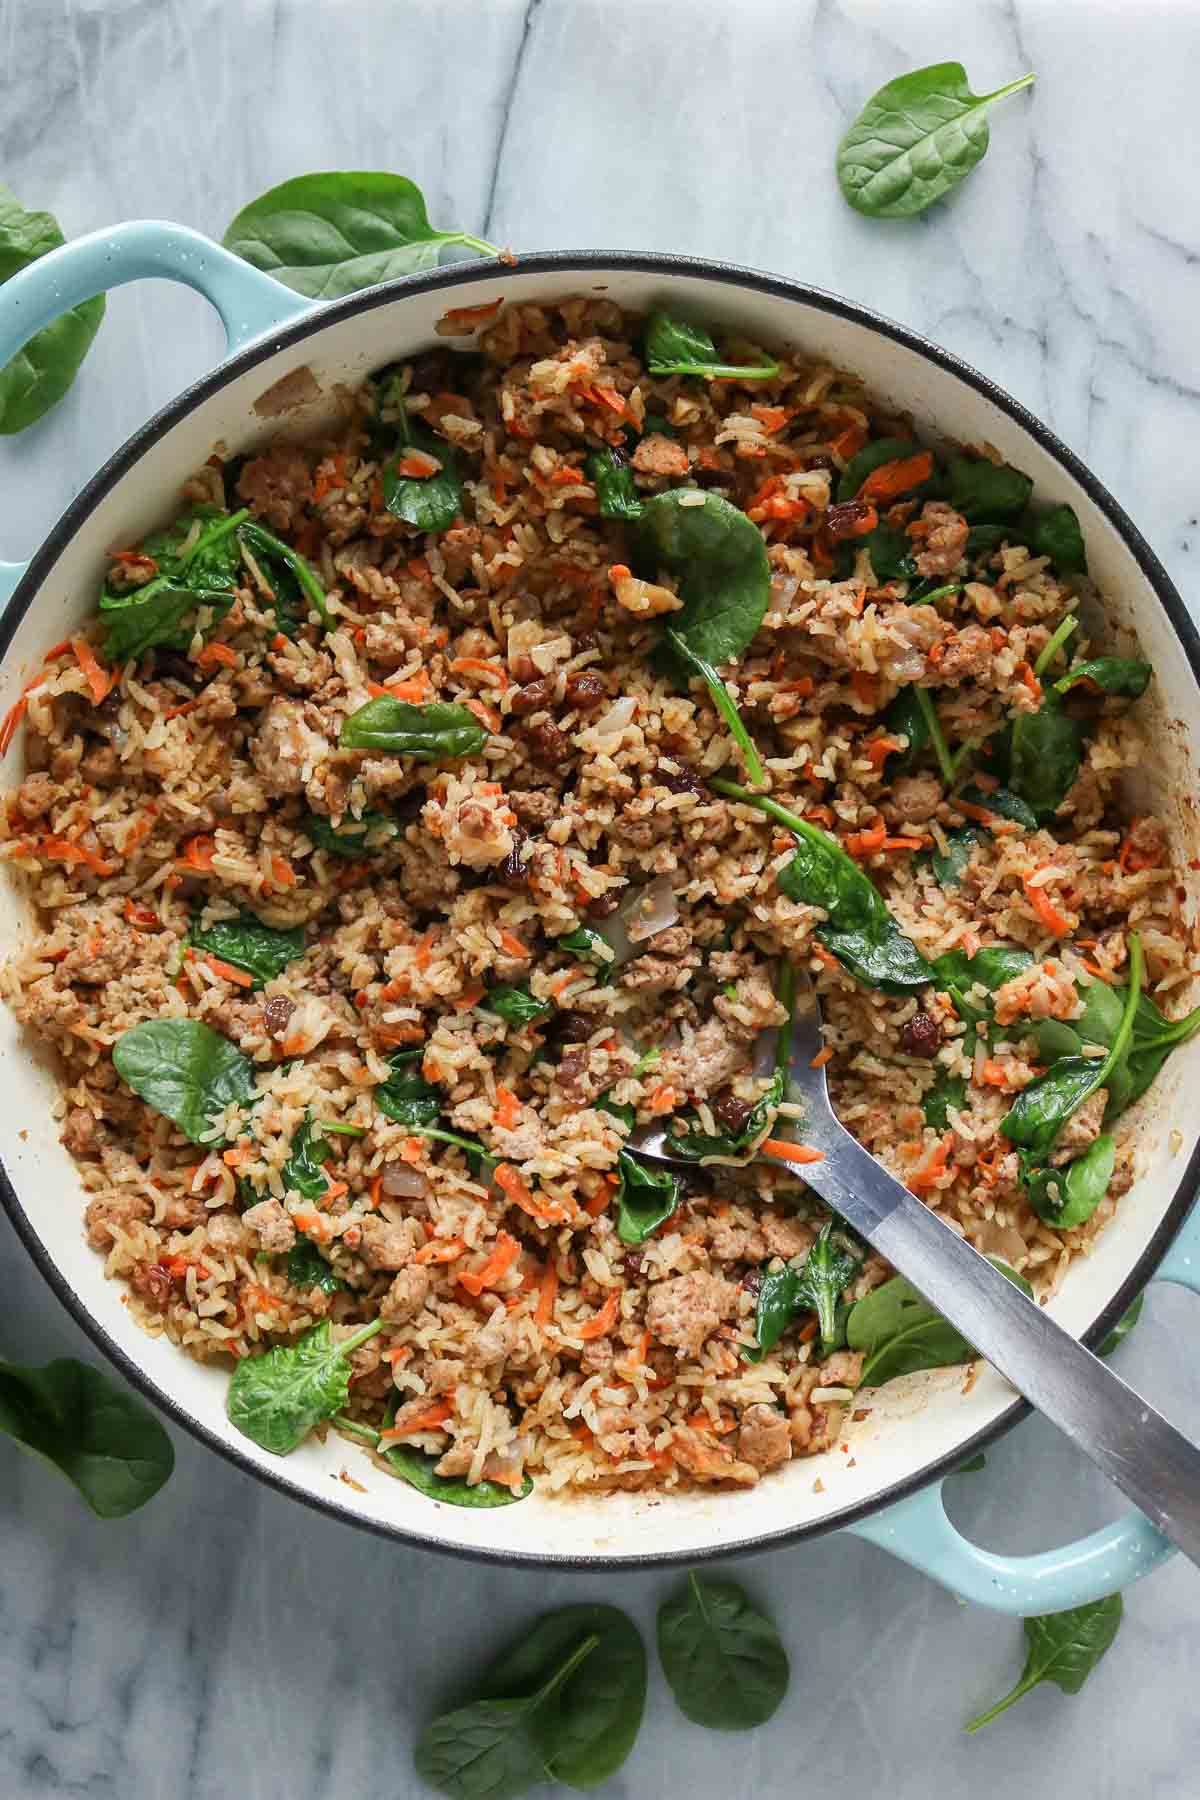 Ground chicken, rice and vegetables in a pan with a serving spoon.